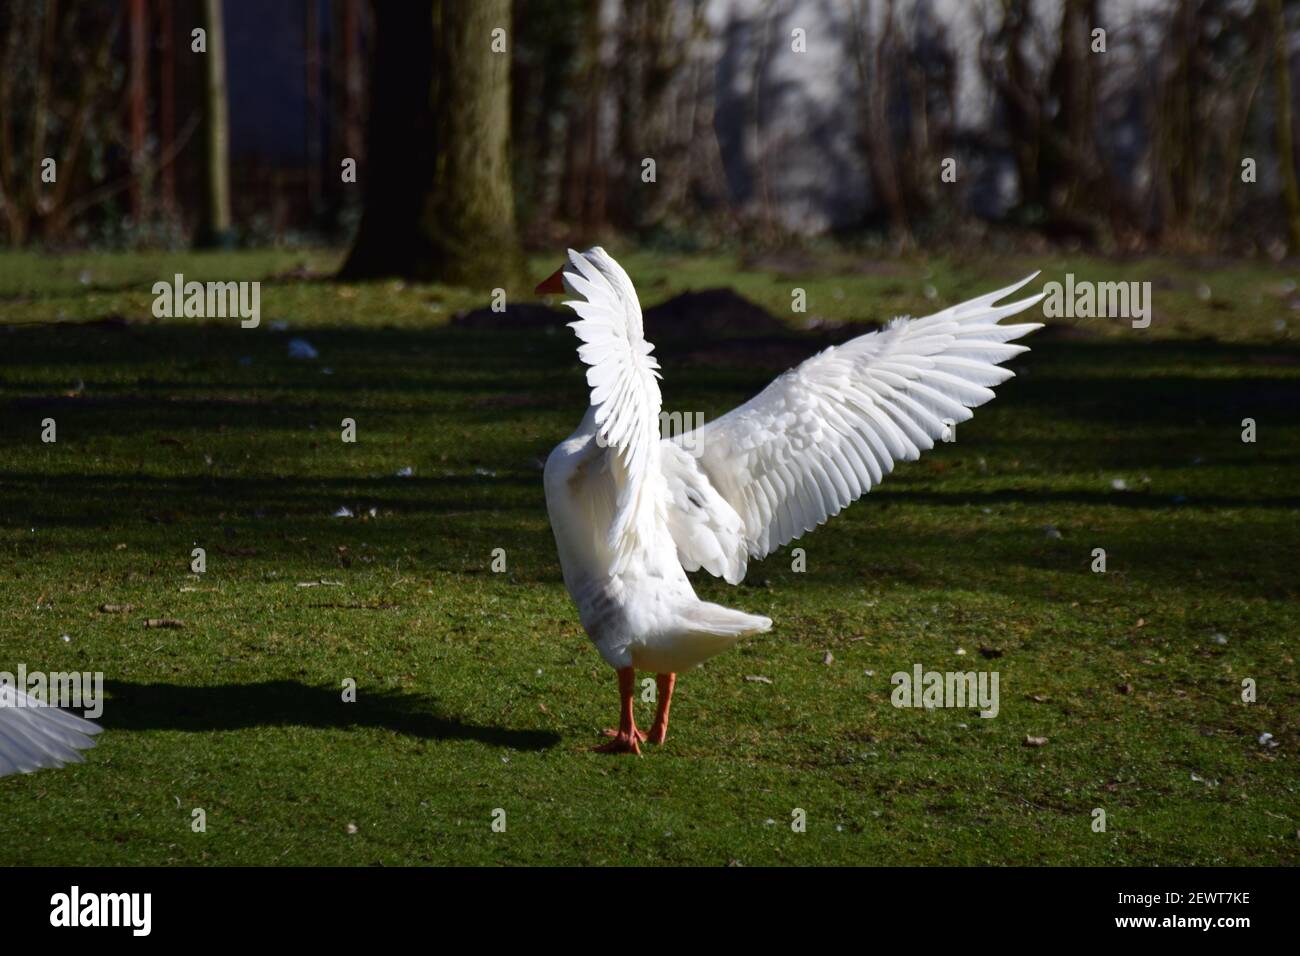 A white goose standing on the lawn spreads her plumage Stock Photo